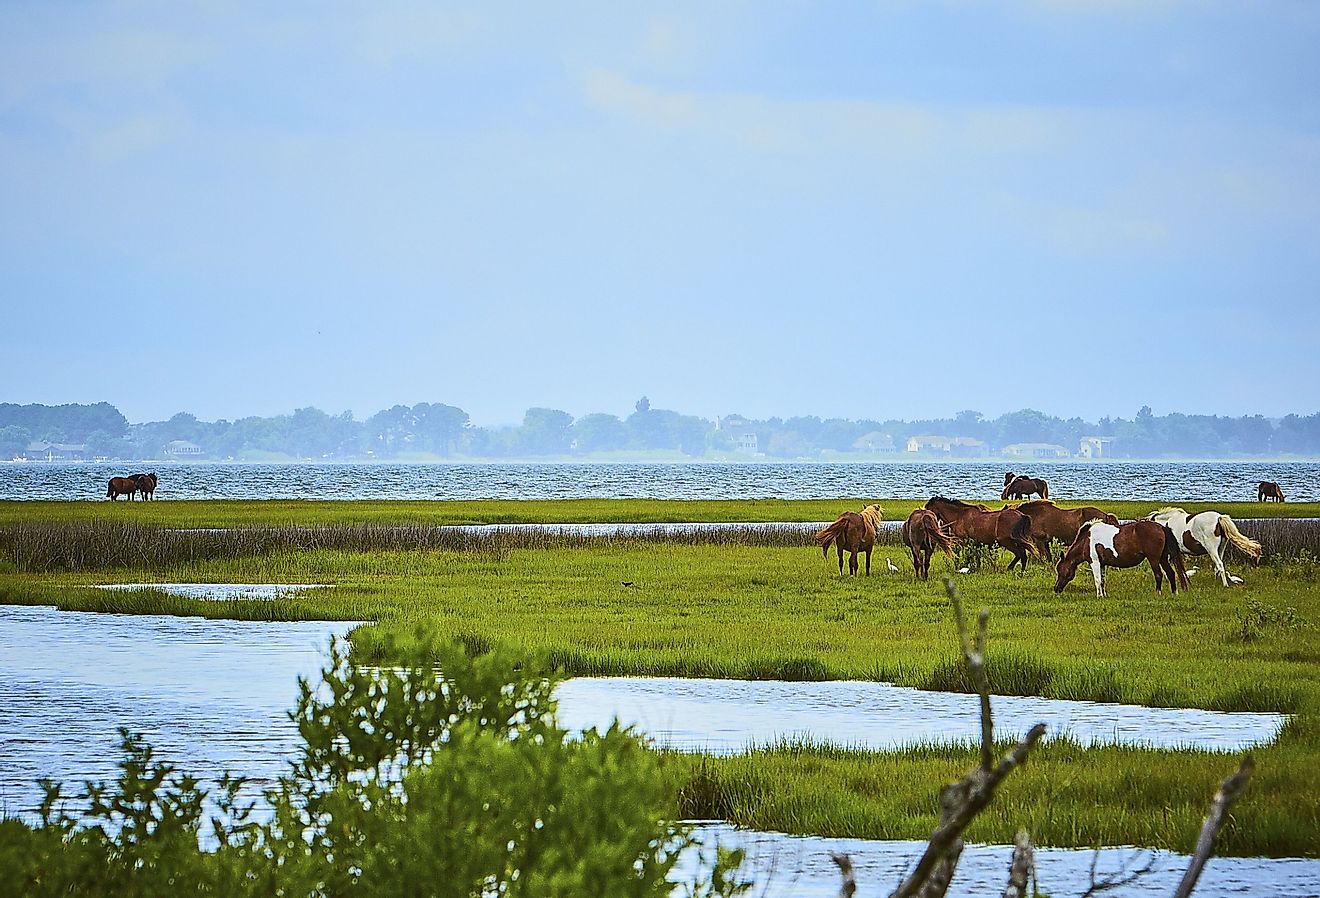 Wild horses of Assateague Island in Maryland. Image credit Jason Donnelly via Shutterstock